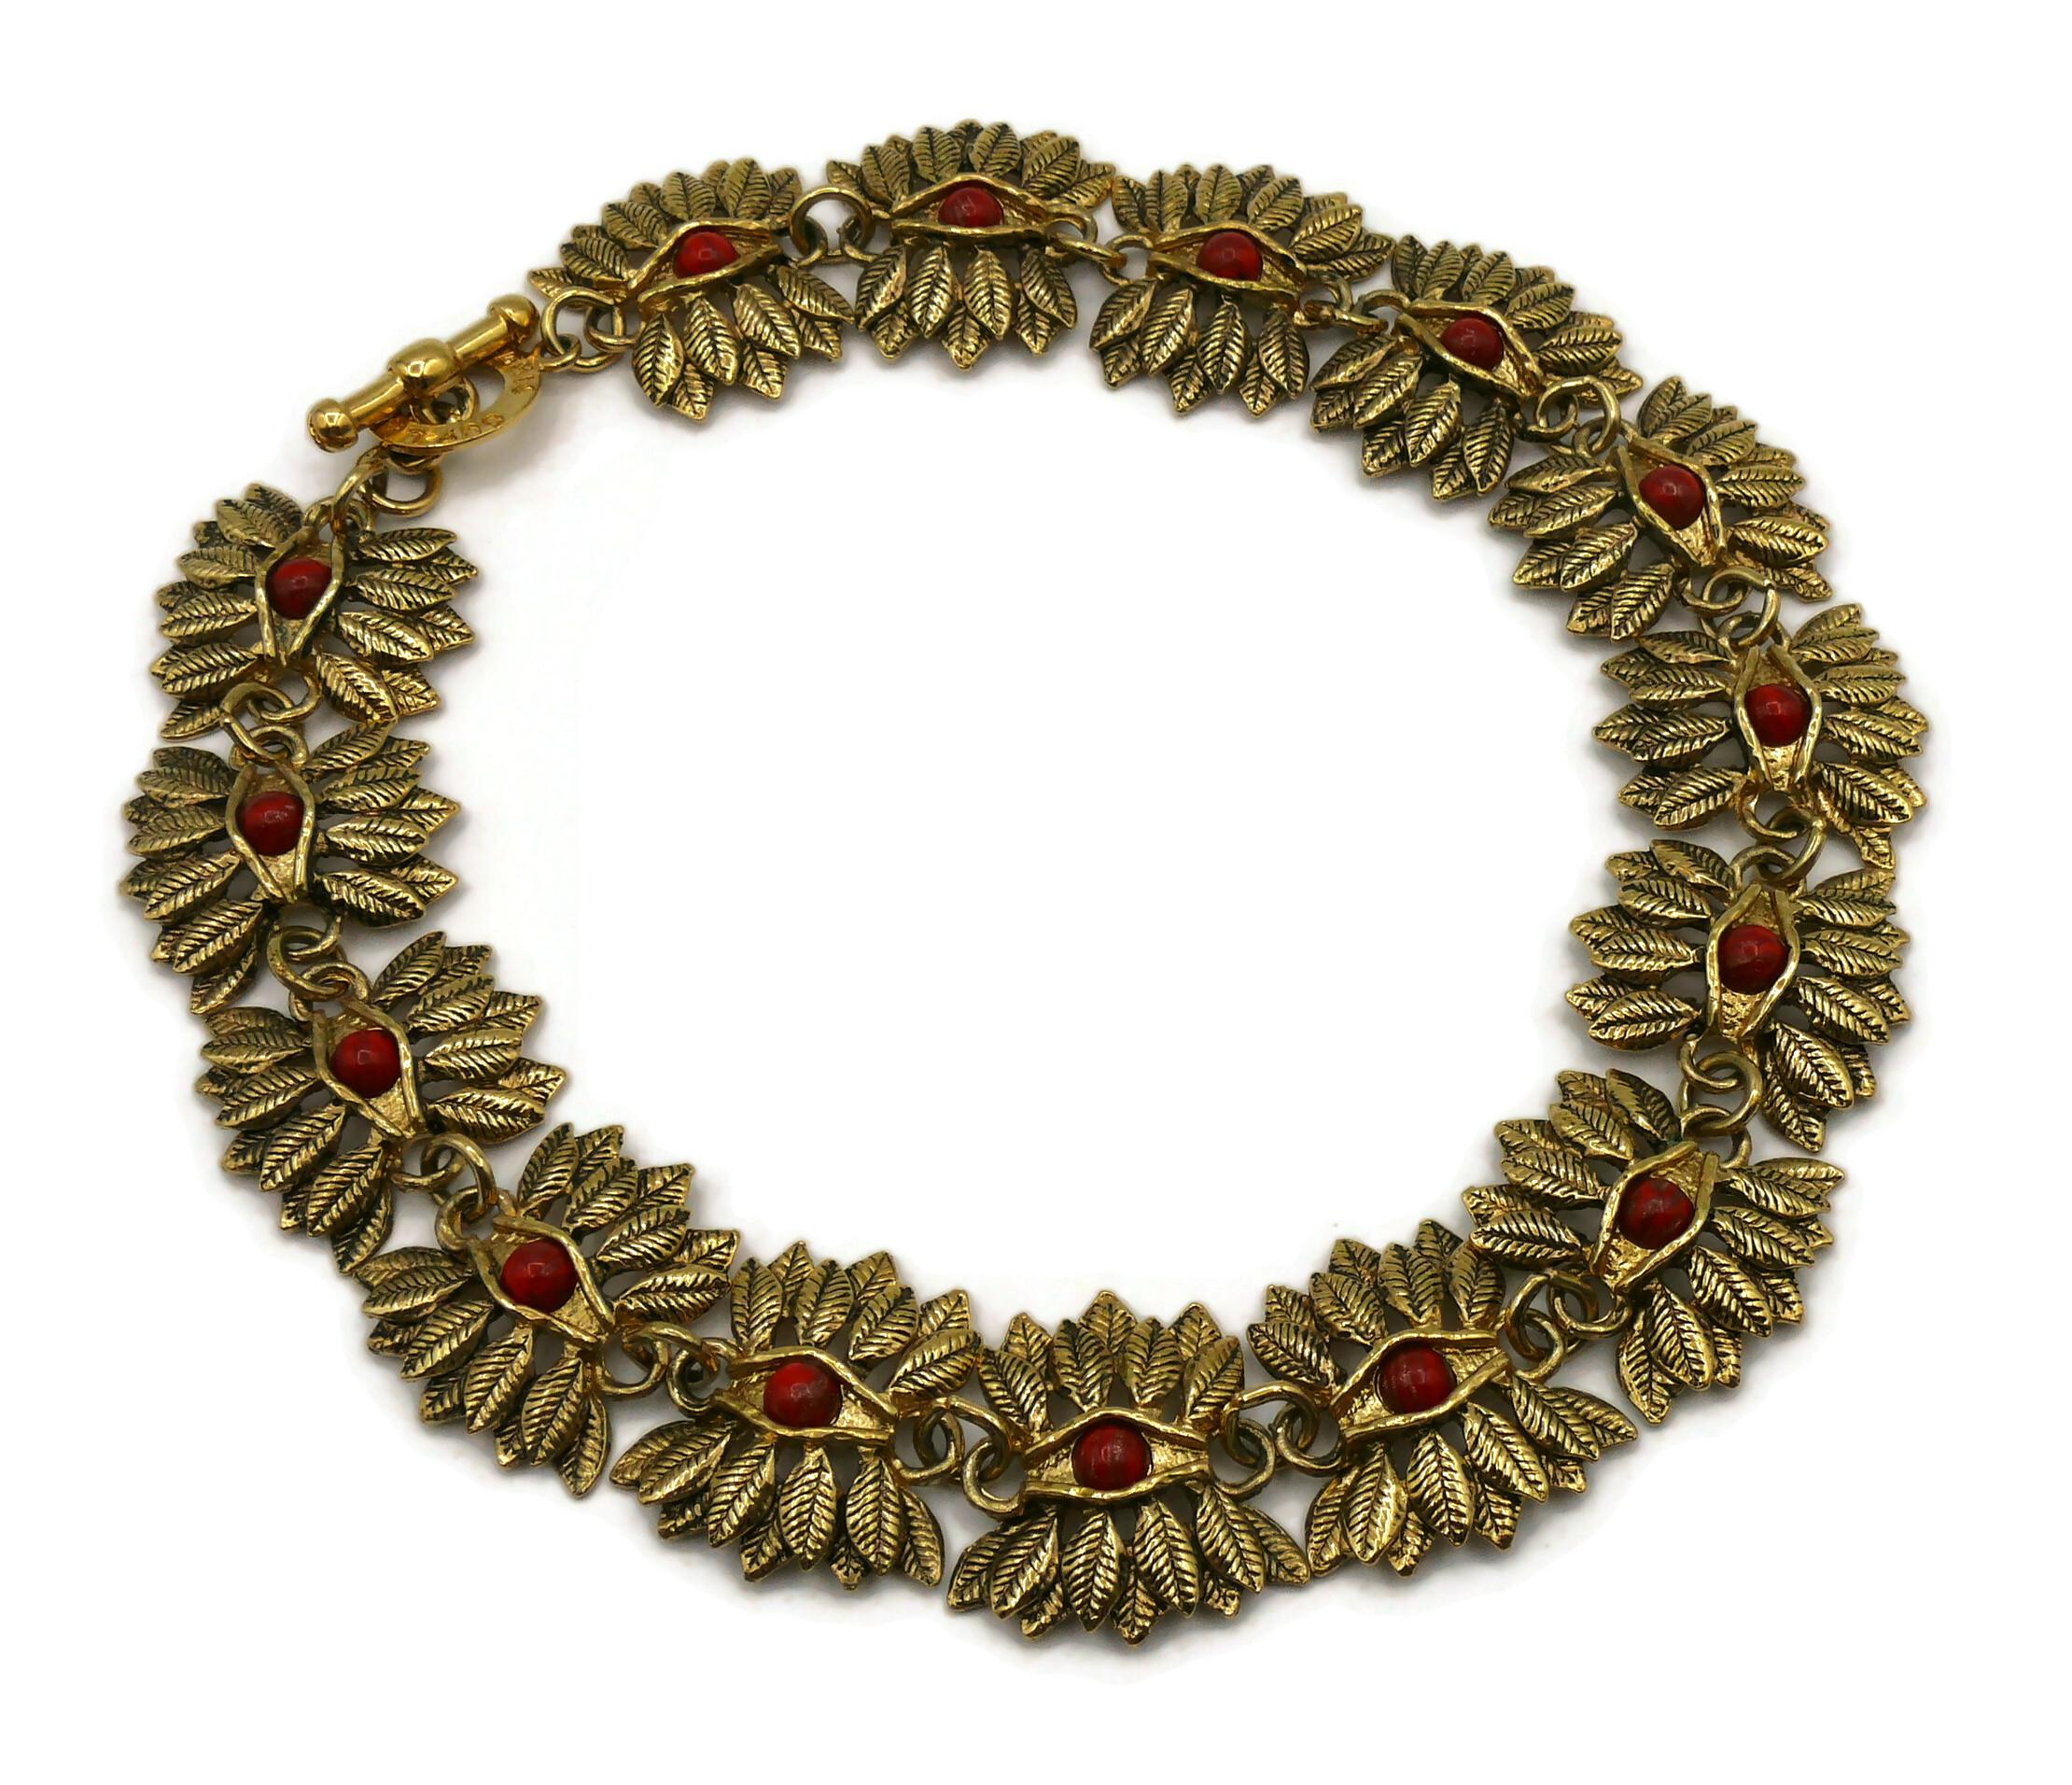 GUY LAROCHE Vintage Eye and Feathers Links Necklace In Excellent Condition For Sale In Nice, FR